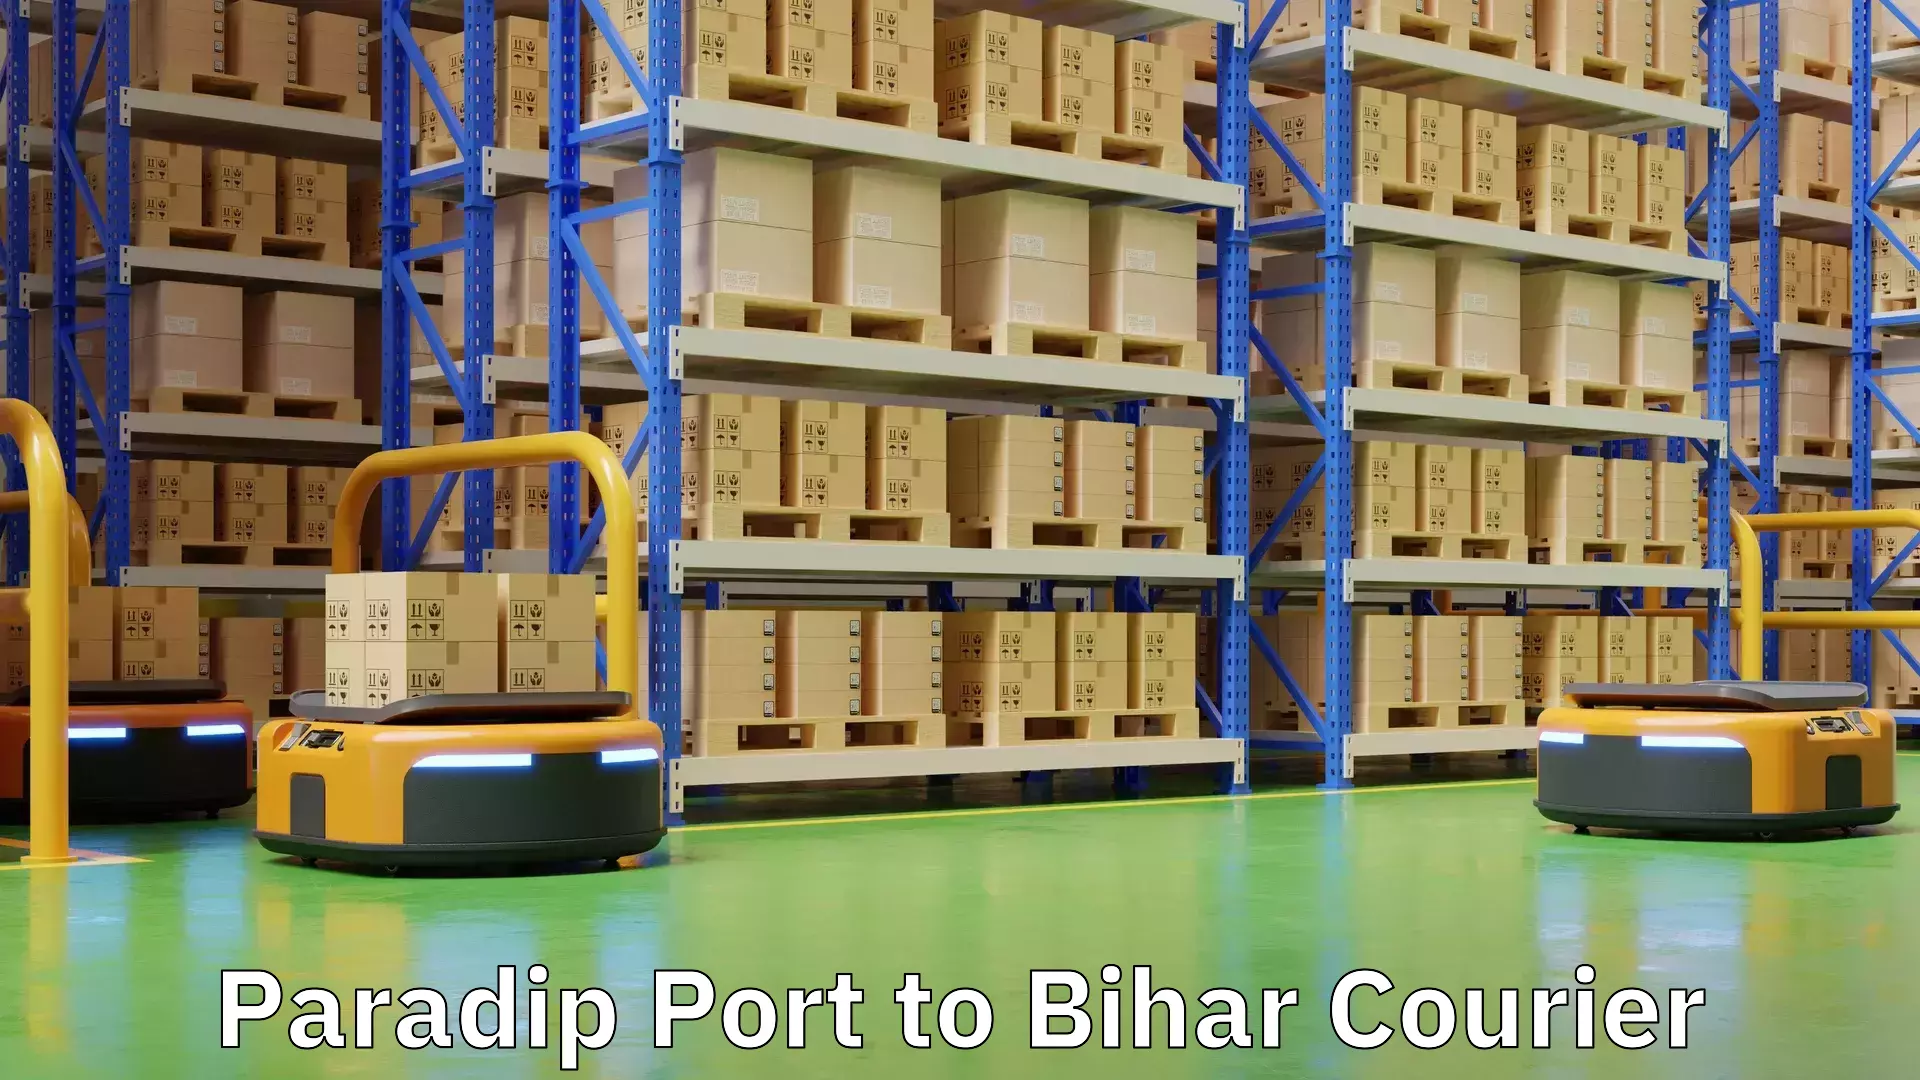 Nationwide shipping services Paradip Port to Bihar